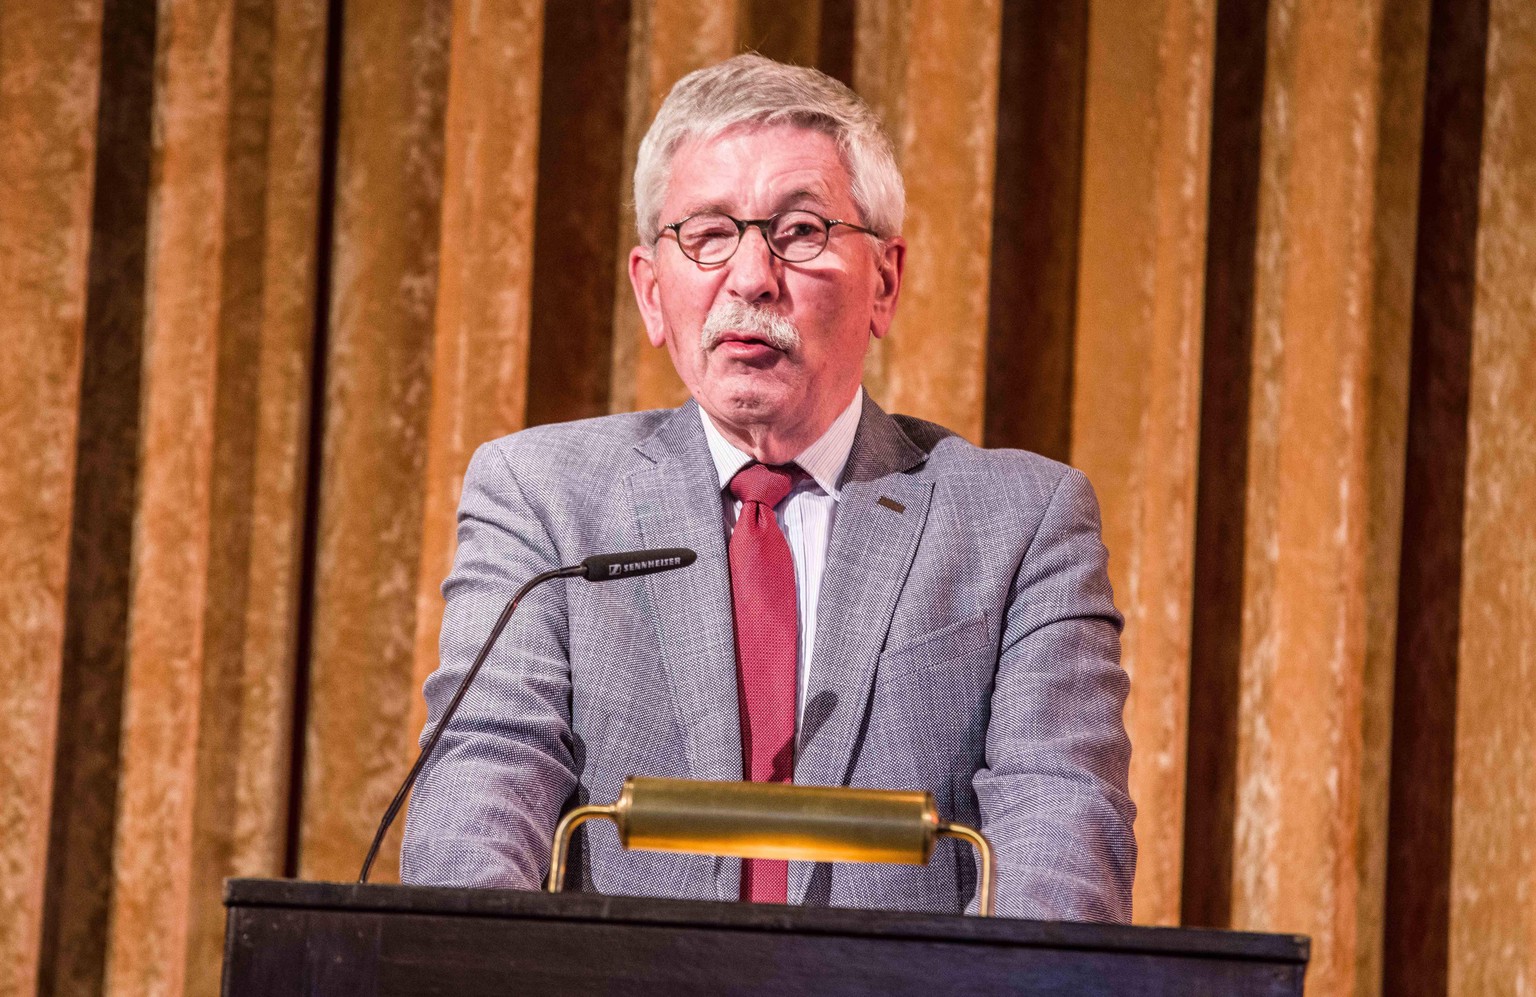 April 3, 2019 - Munich, Bavaria, Germany - Controversial politician and book author THILO SARRAZIN held a speaking engagement in the Munich Kuenstlerhaus to approximately 100 fans, largely from right- ...